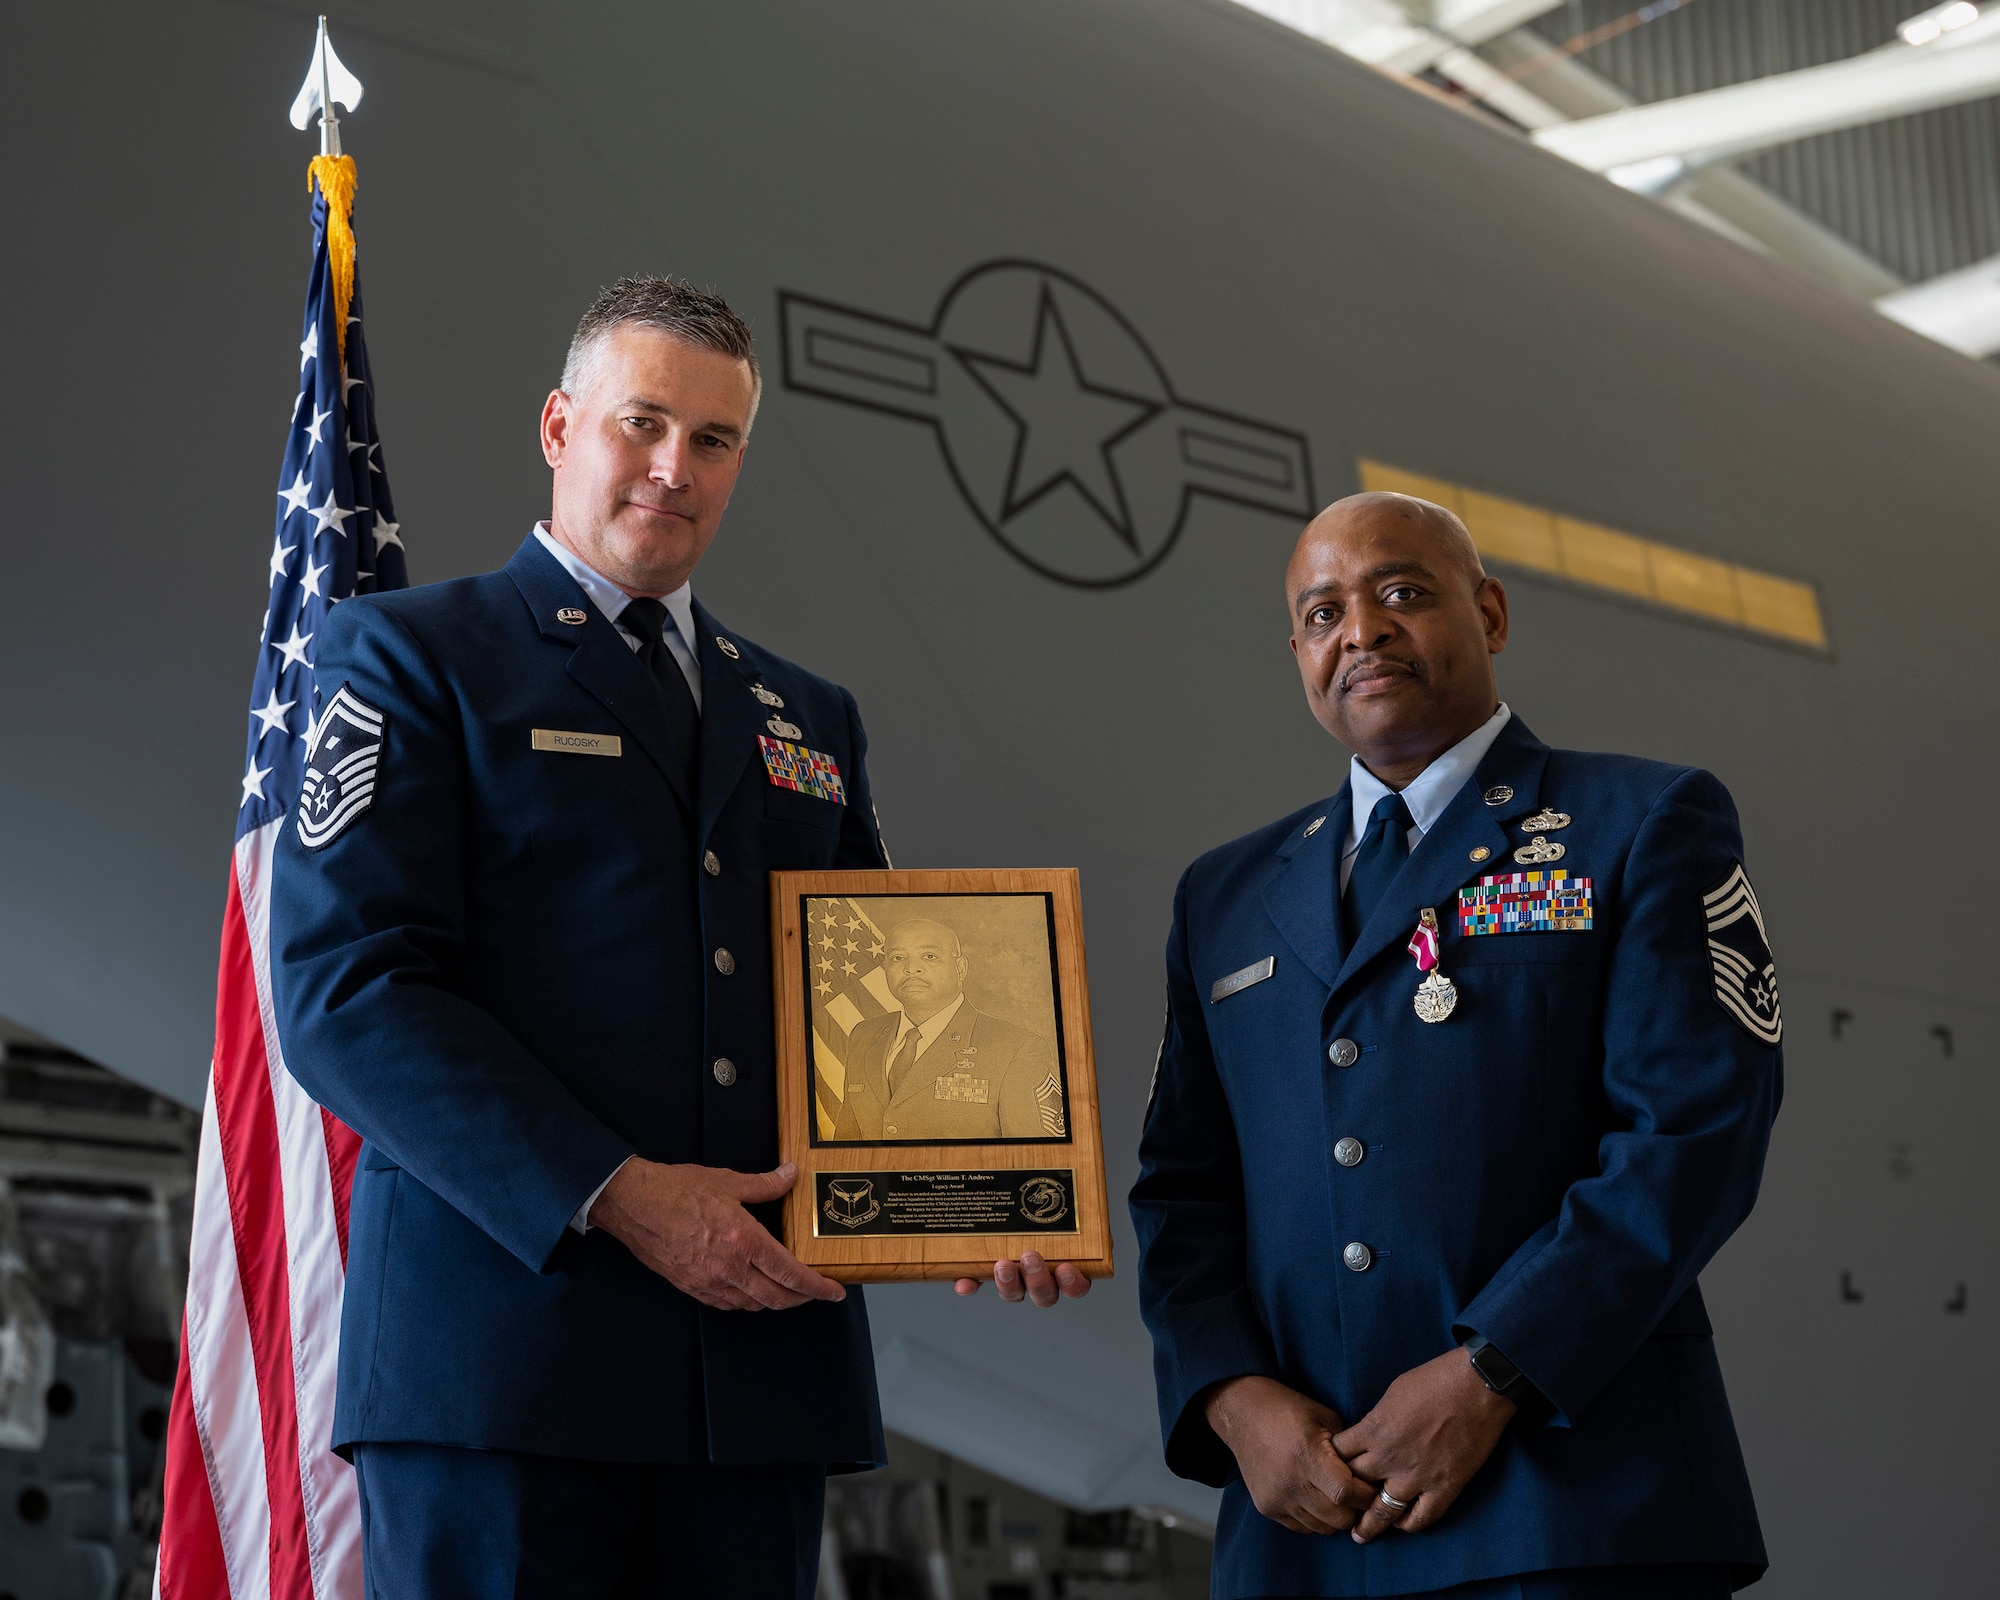 Master Sgt. James Rucosky, 911th Logistics Readiness Squadron first sergeant, presents a plaque to Chief Master Sgt. William T. Andrews, 911th LRS superintendent, during Andrews retirement ceremony at the Pittsburgh International Airport Air Reserve Station, Pennsylvania, June 5, 2021.